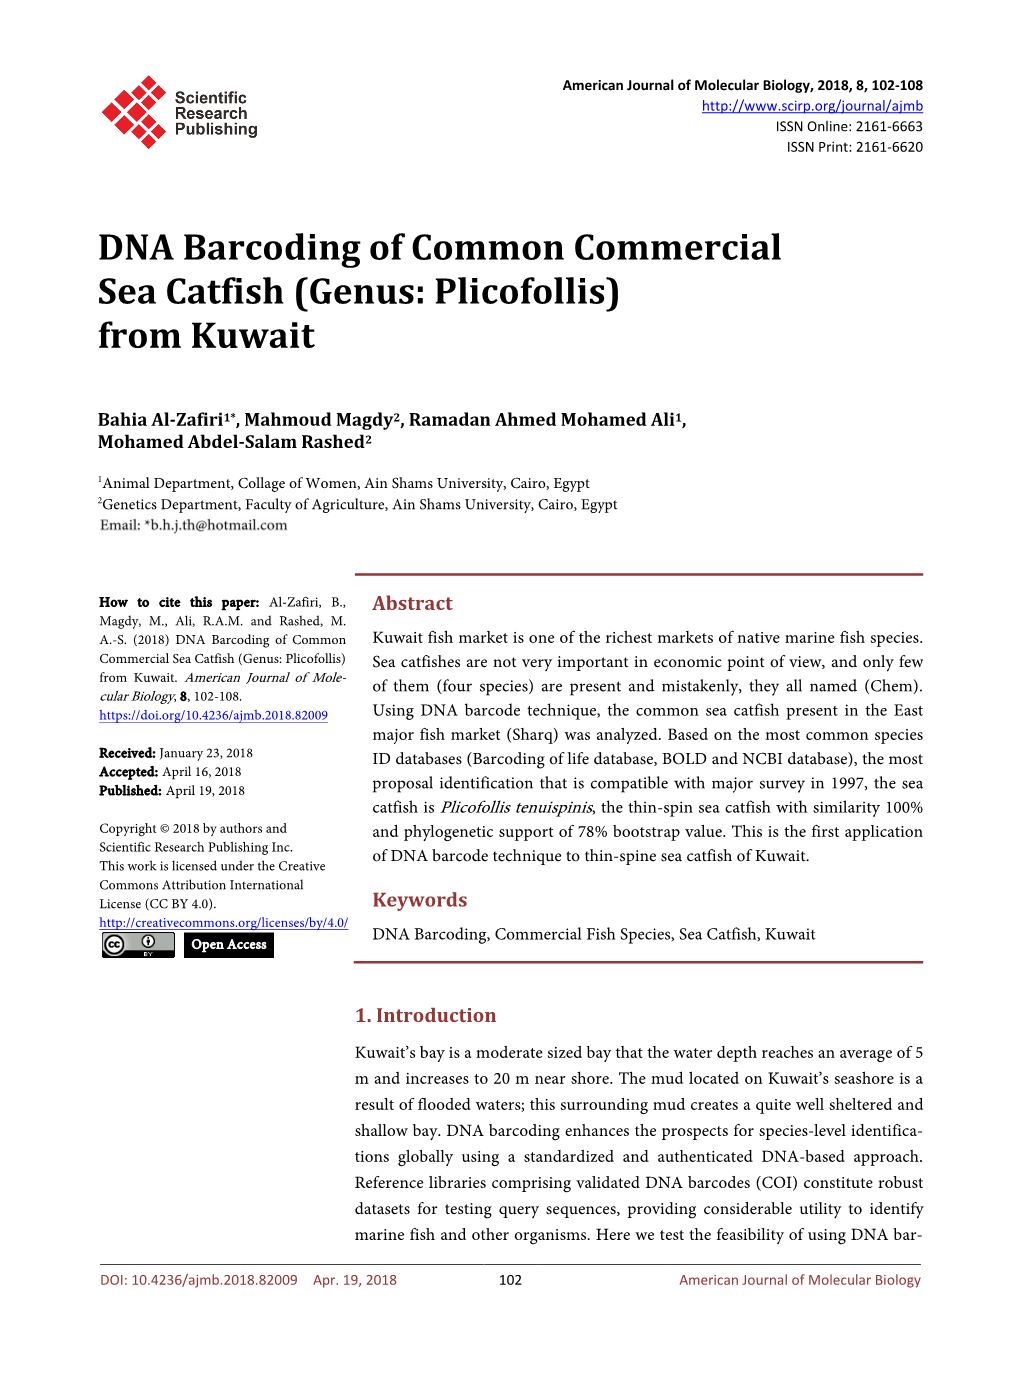 DNA Barcoding of Common Commercial Sea Catfish (Genus: Plicofollis) from Kuwait